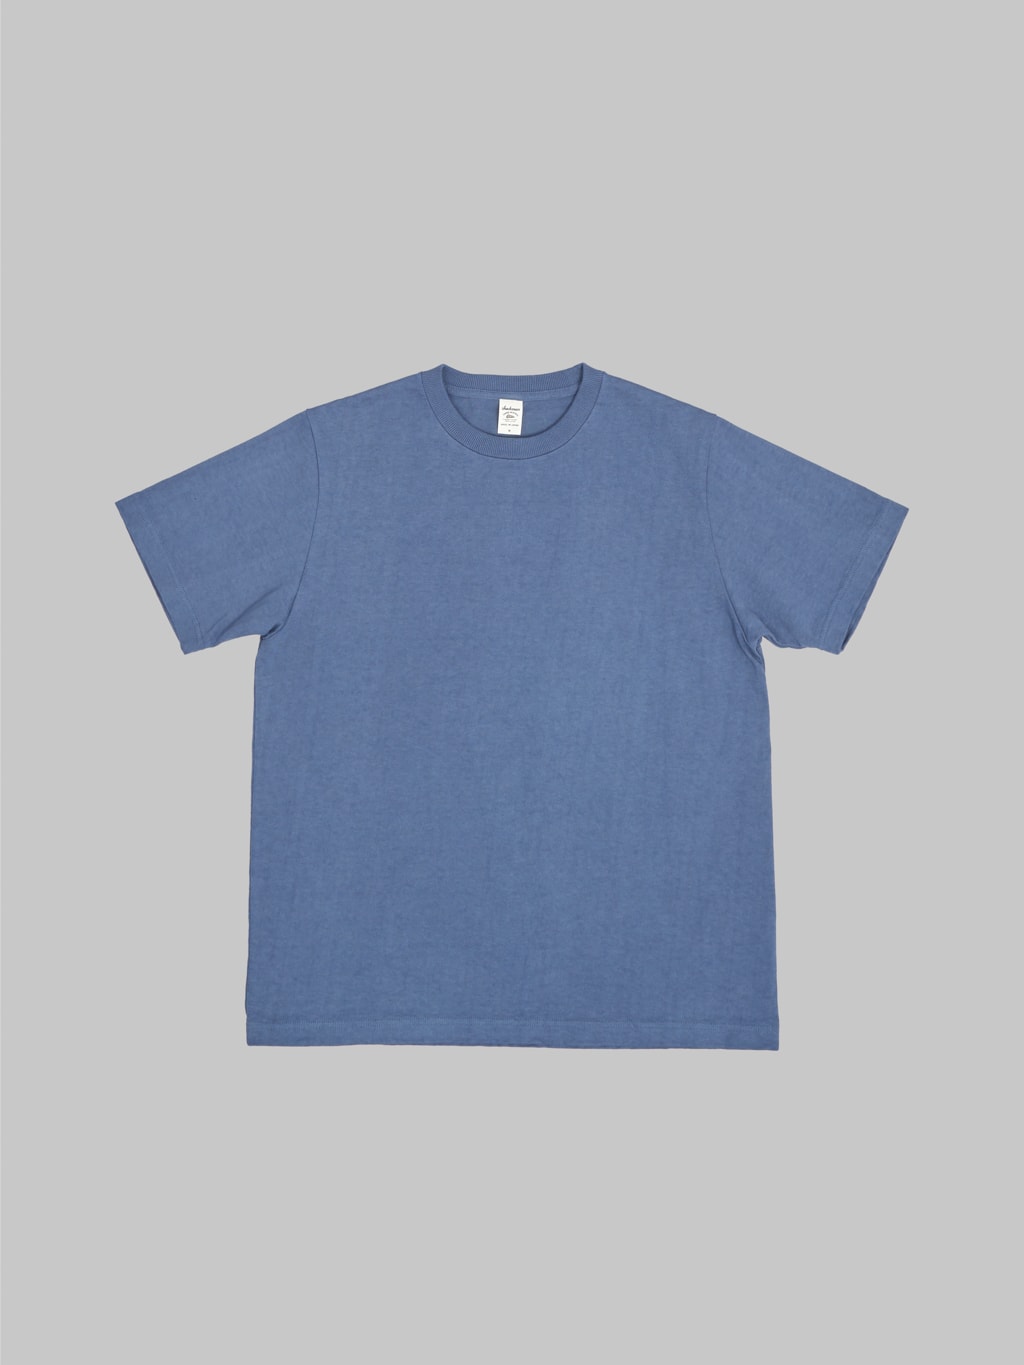 jackman dotsume tshirt off classic blue front